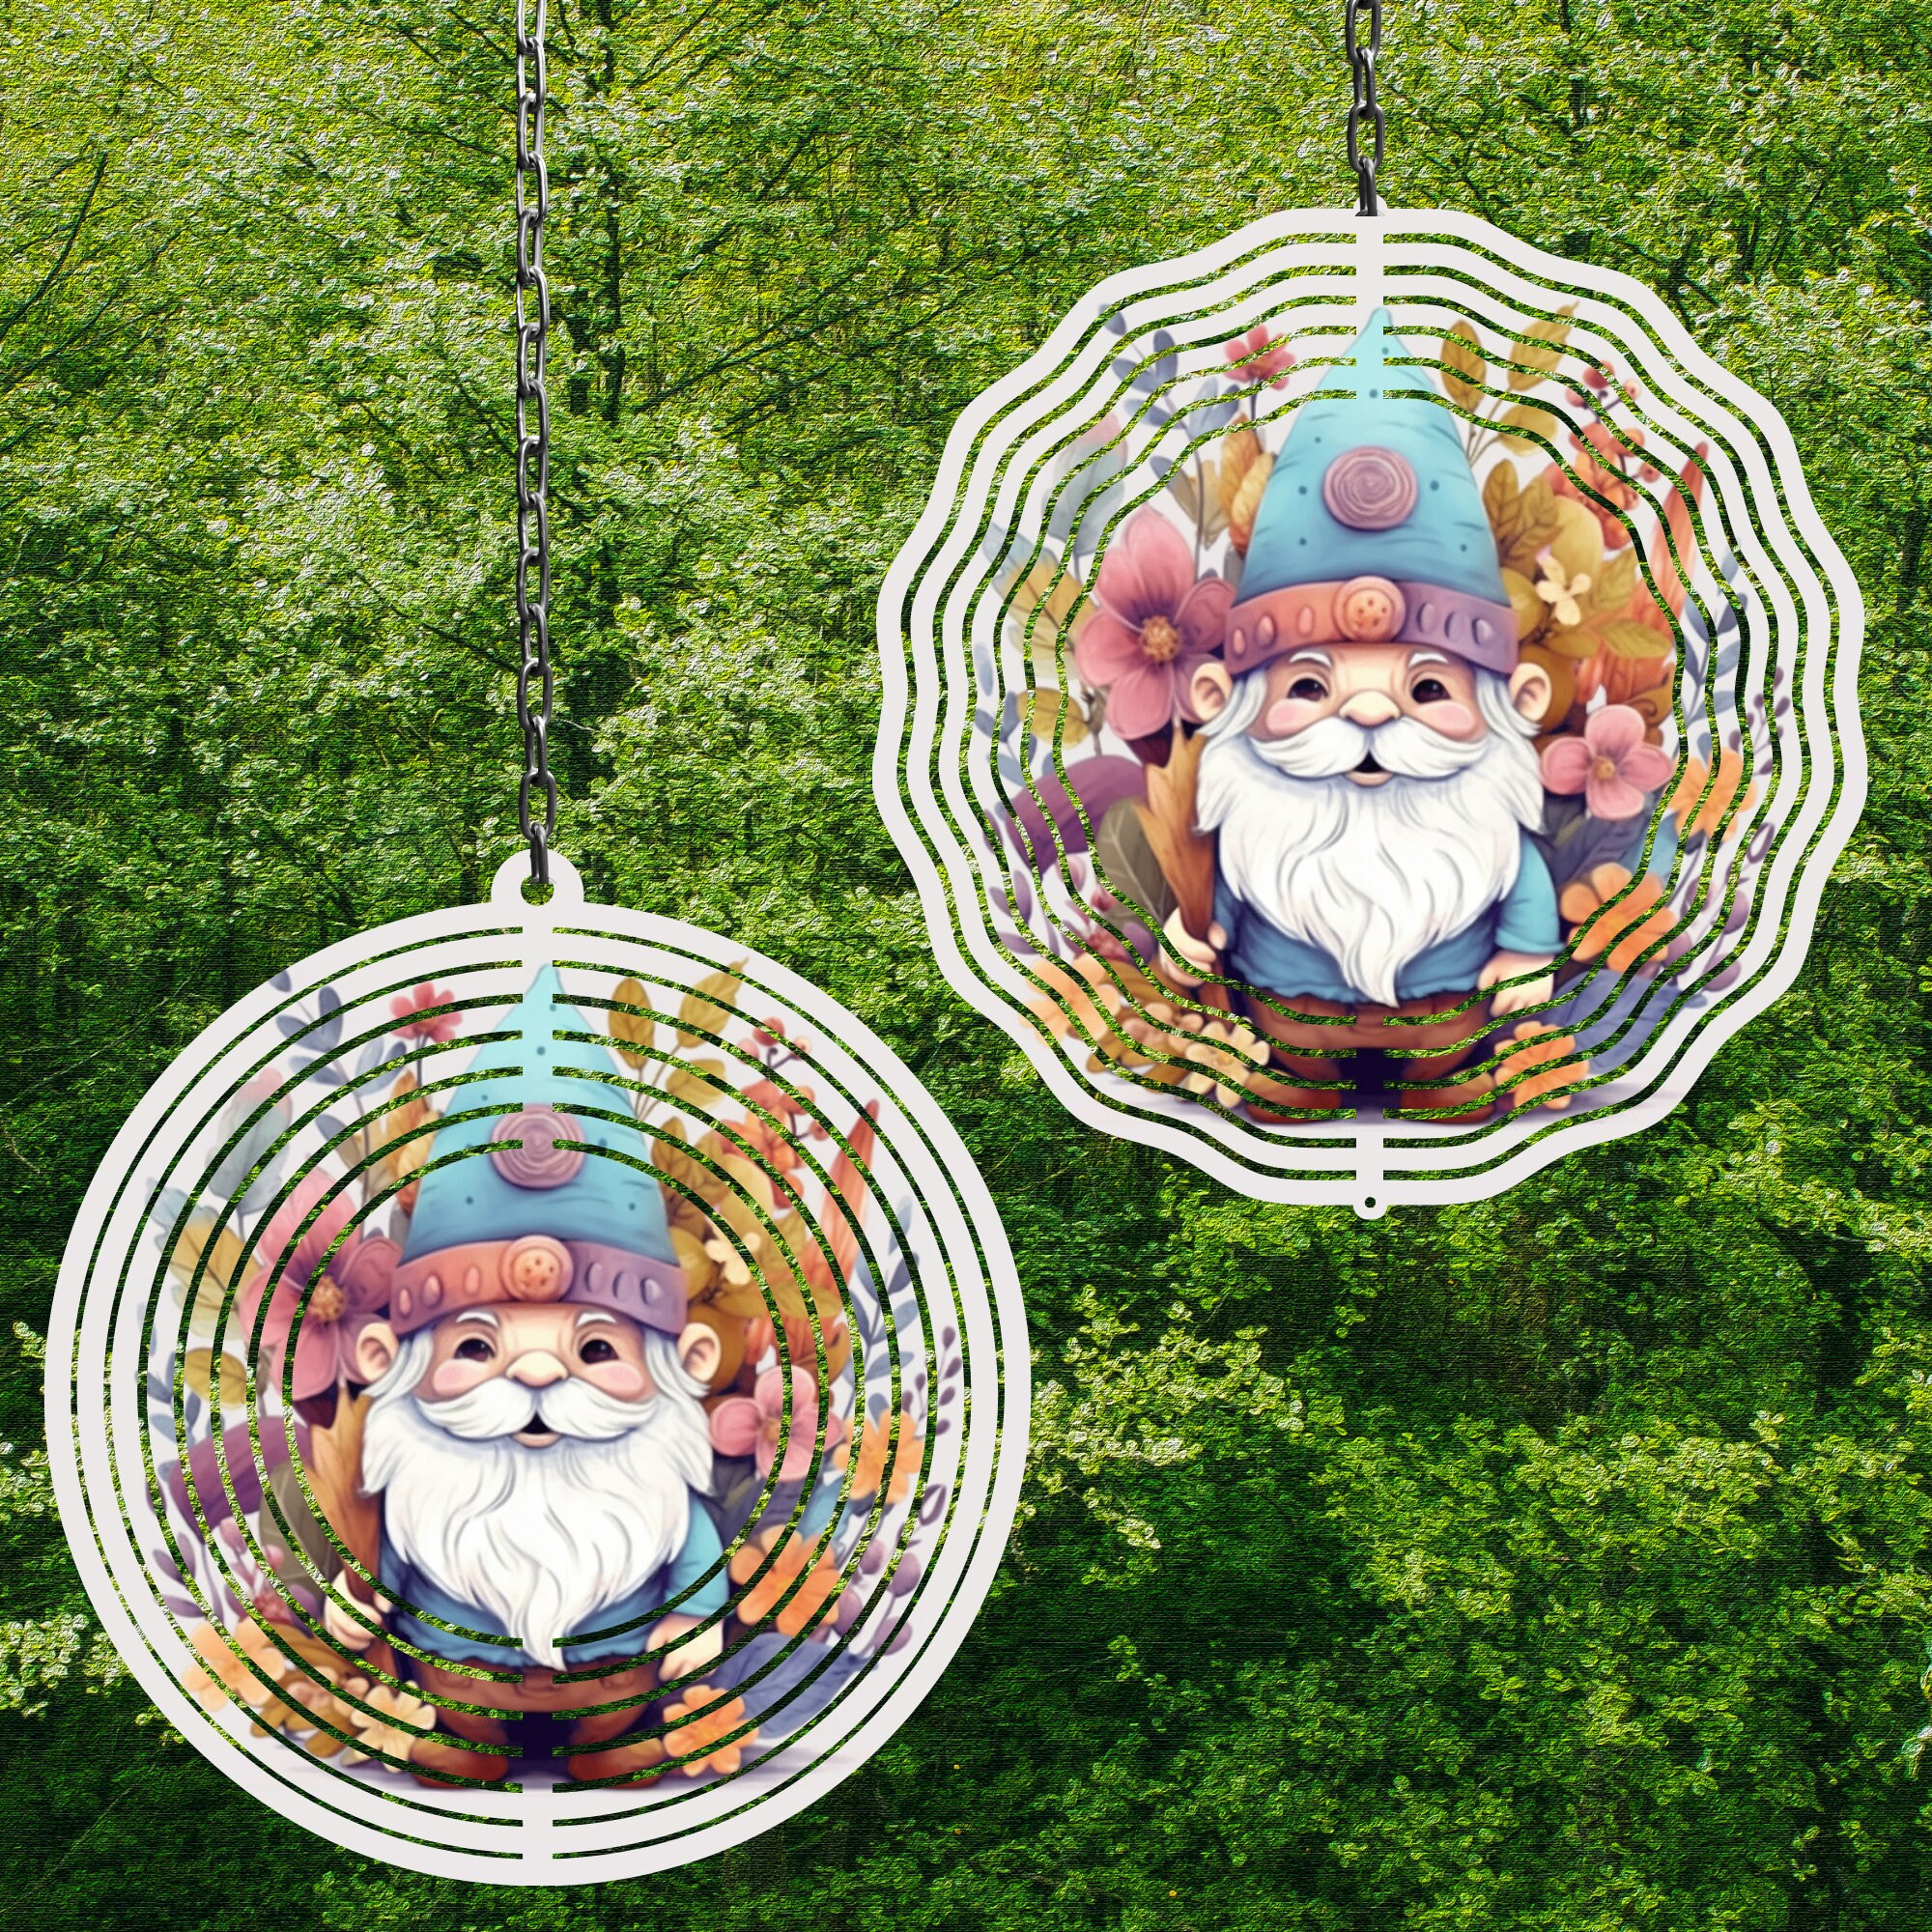 Gnome Sublimation Wind Spinner For Yard And Garden, Outdoor Garden Yard Decoration, Garden Decor, Chime Art Gift